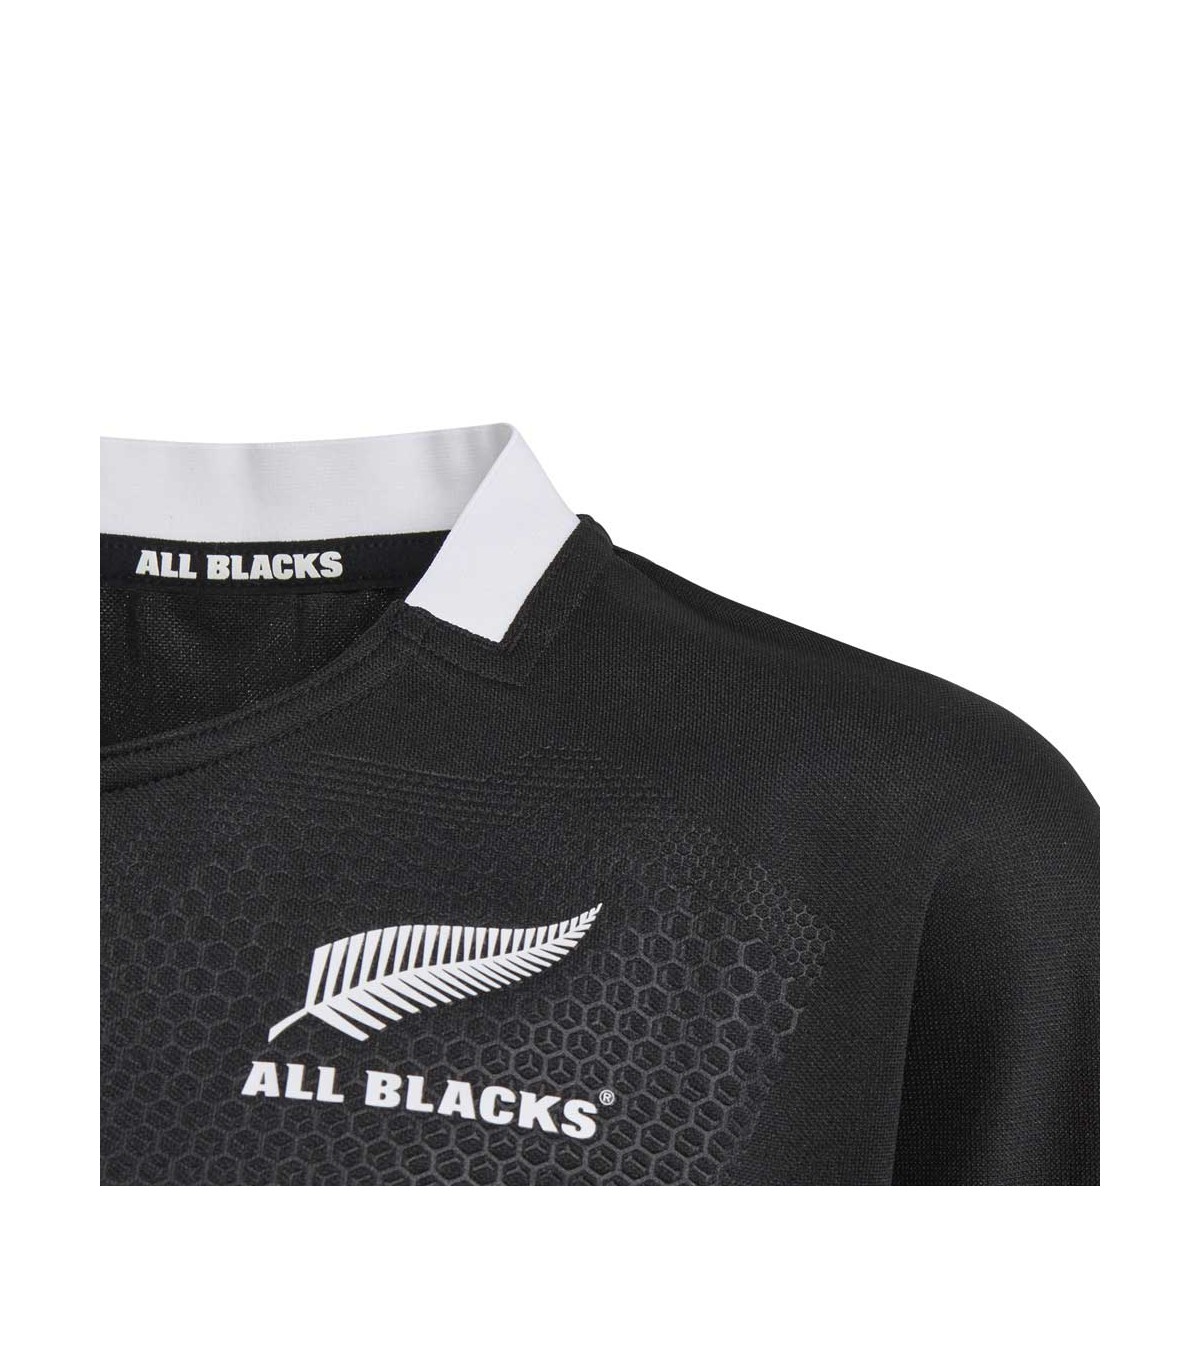 New Zealand All Blacks Home World Rugby Sevens 2018 Official Adidas Rugby  Jersey